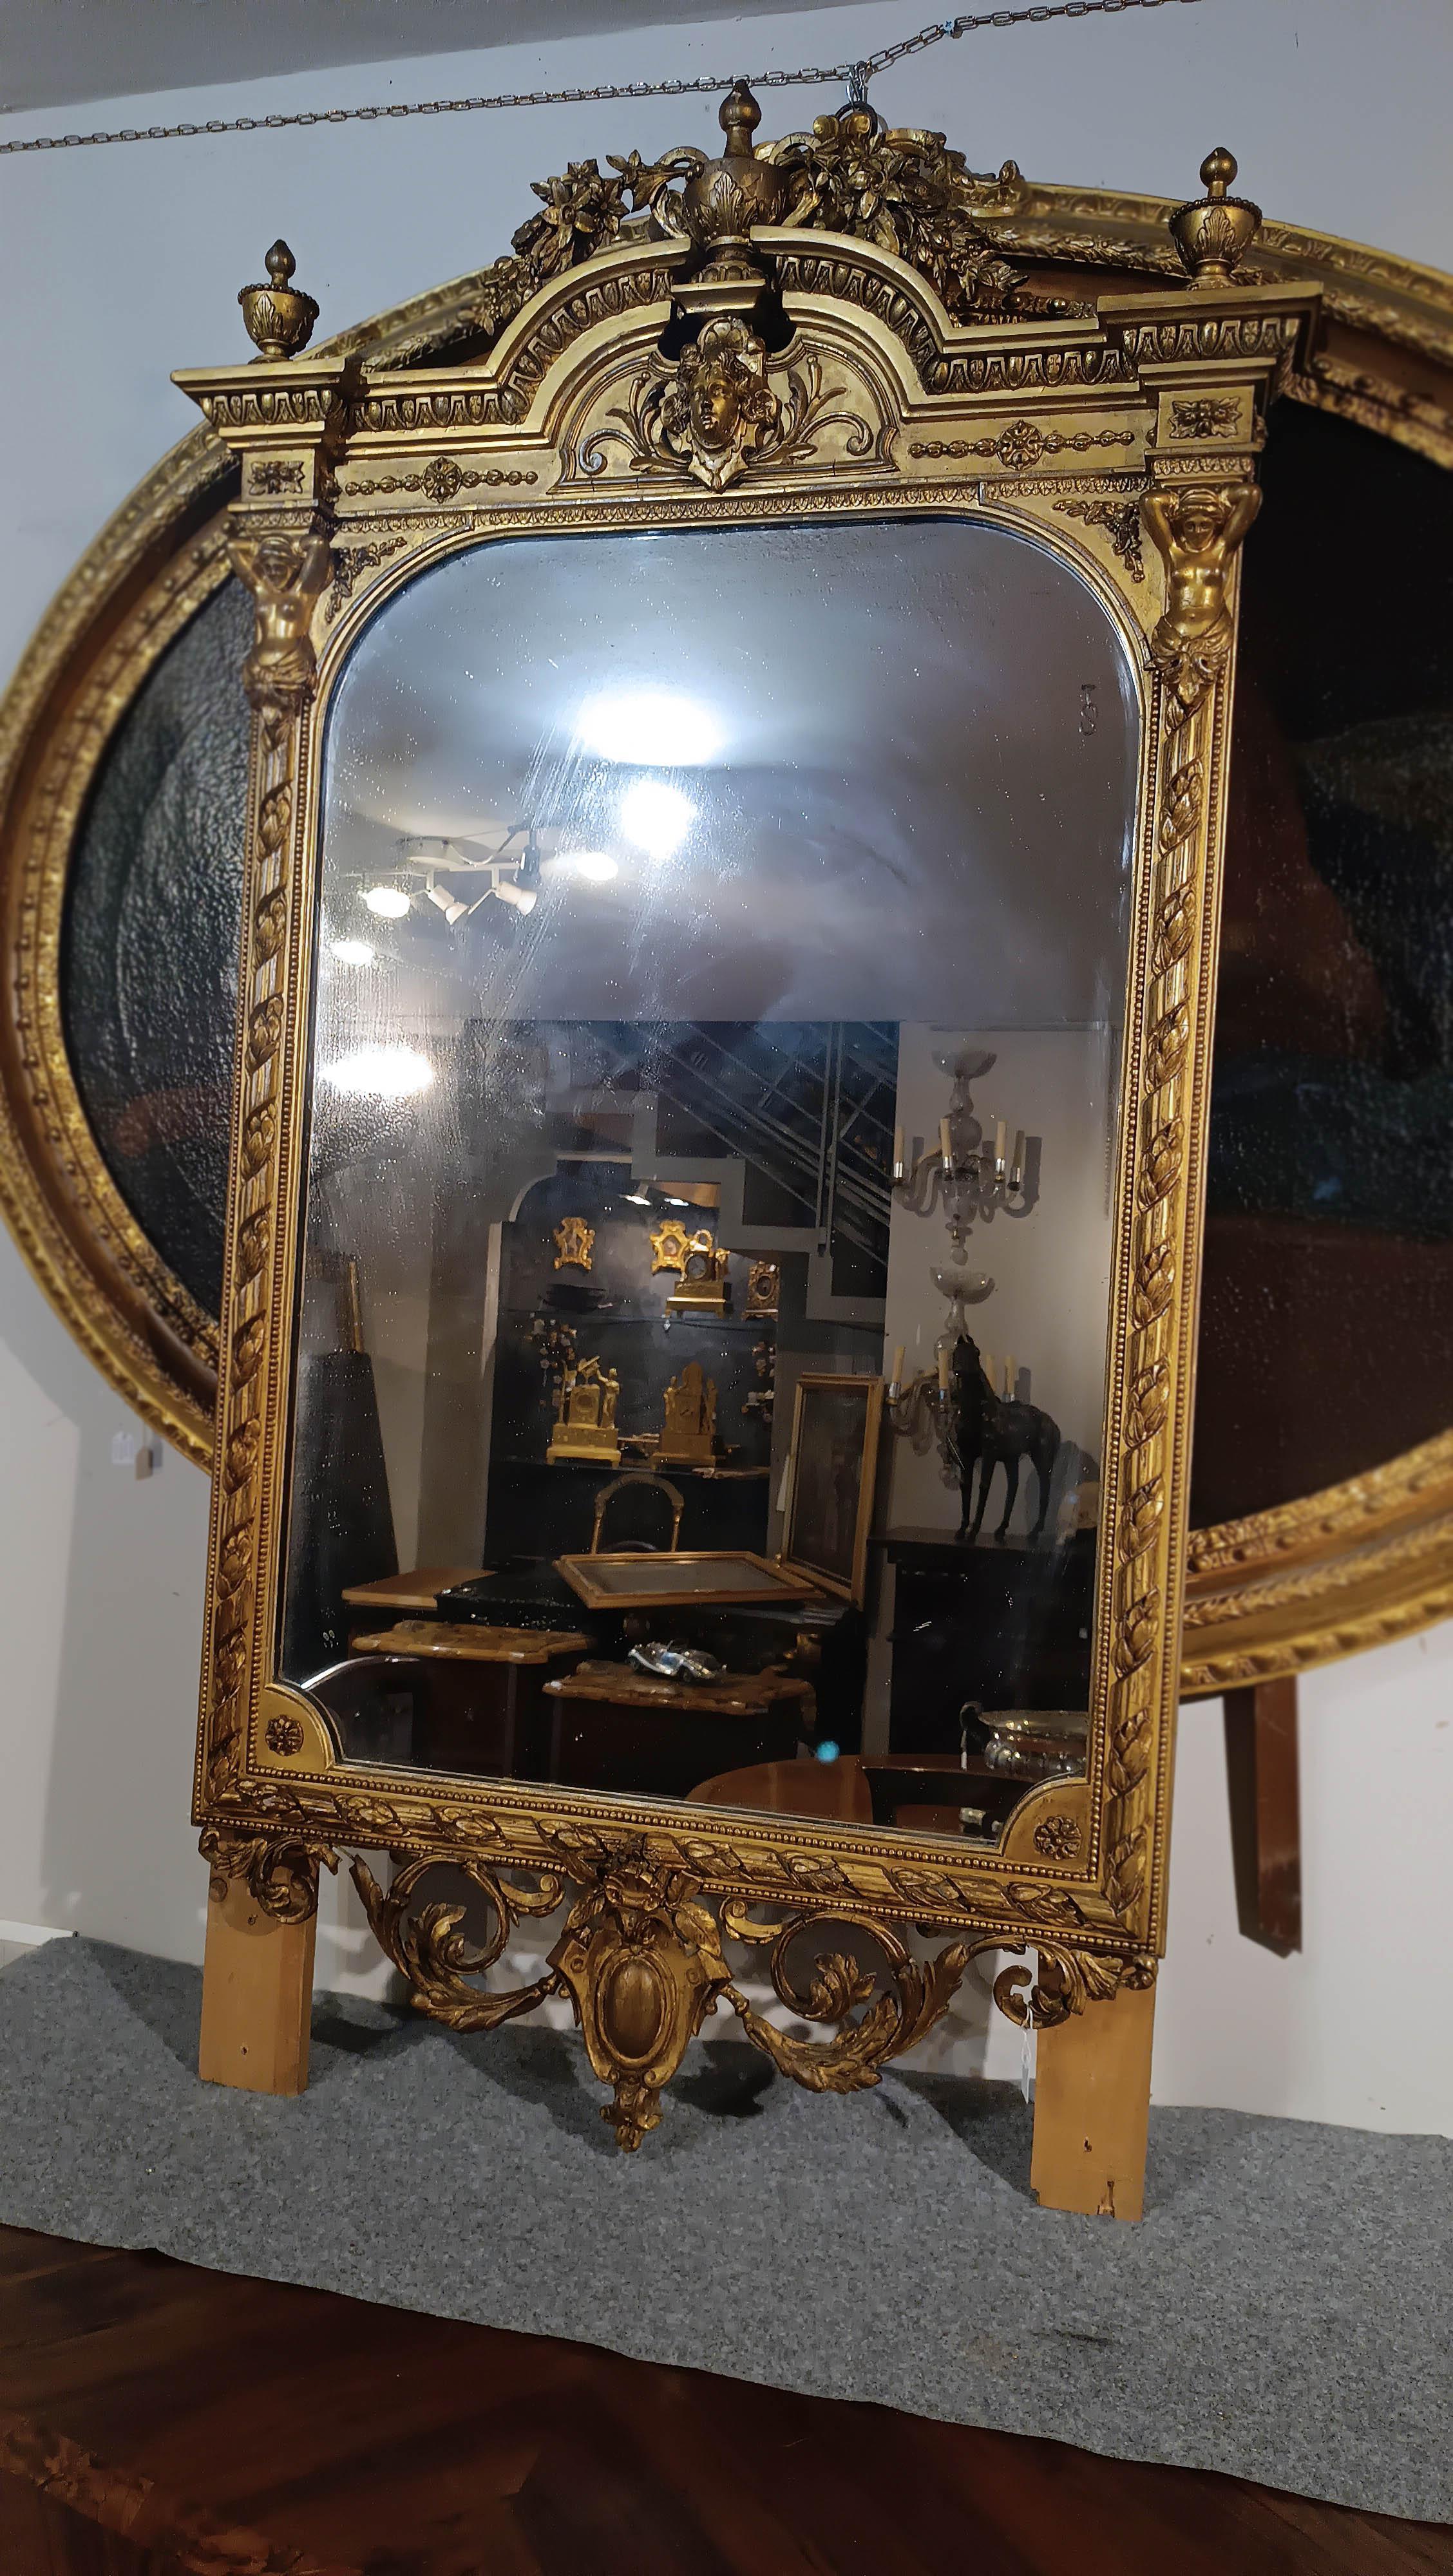 Neoclassical Revival END OF THE 18th CENTURY GOLDEN MIRROR WITH CARYATIDS For Sale